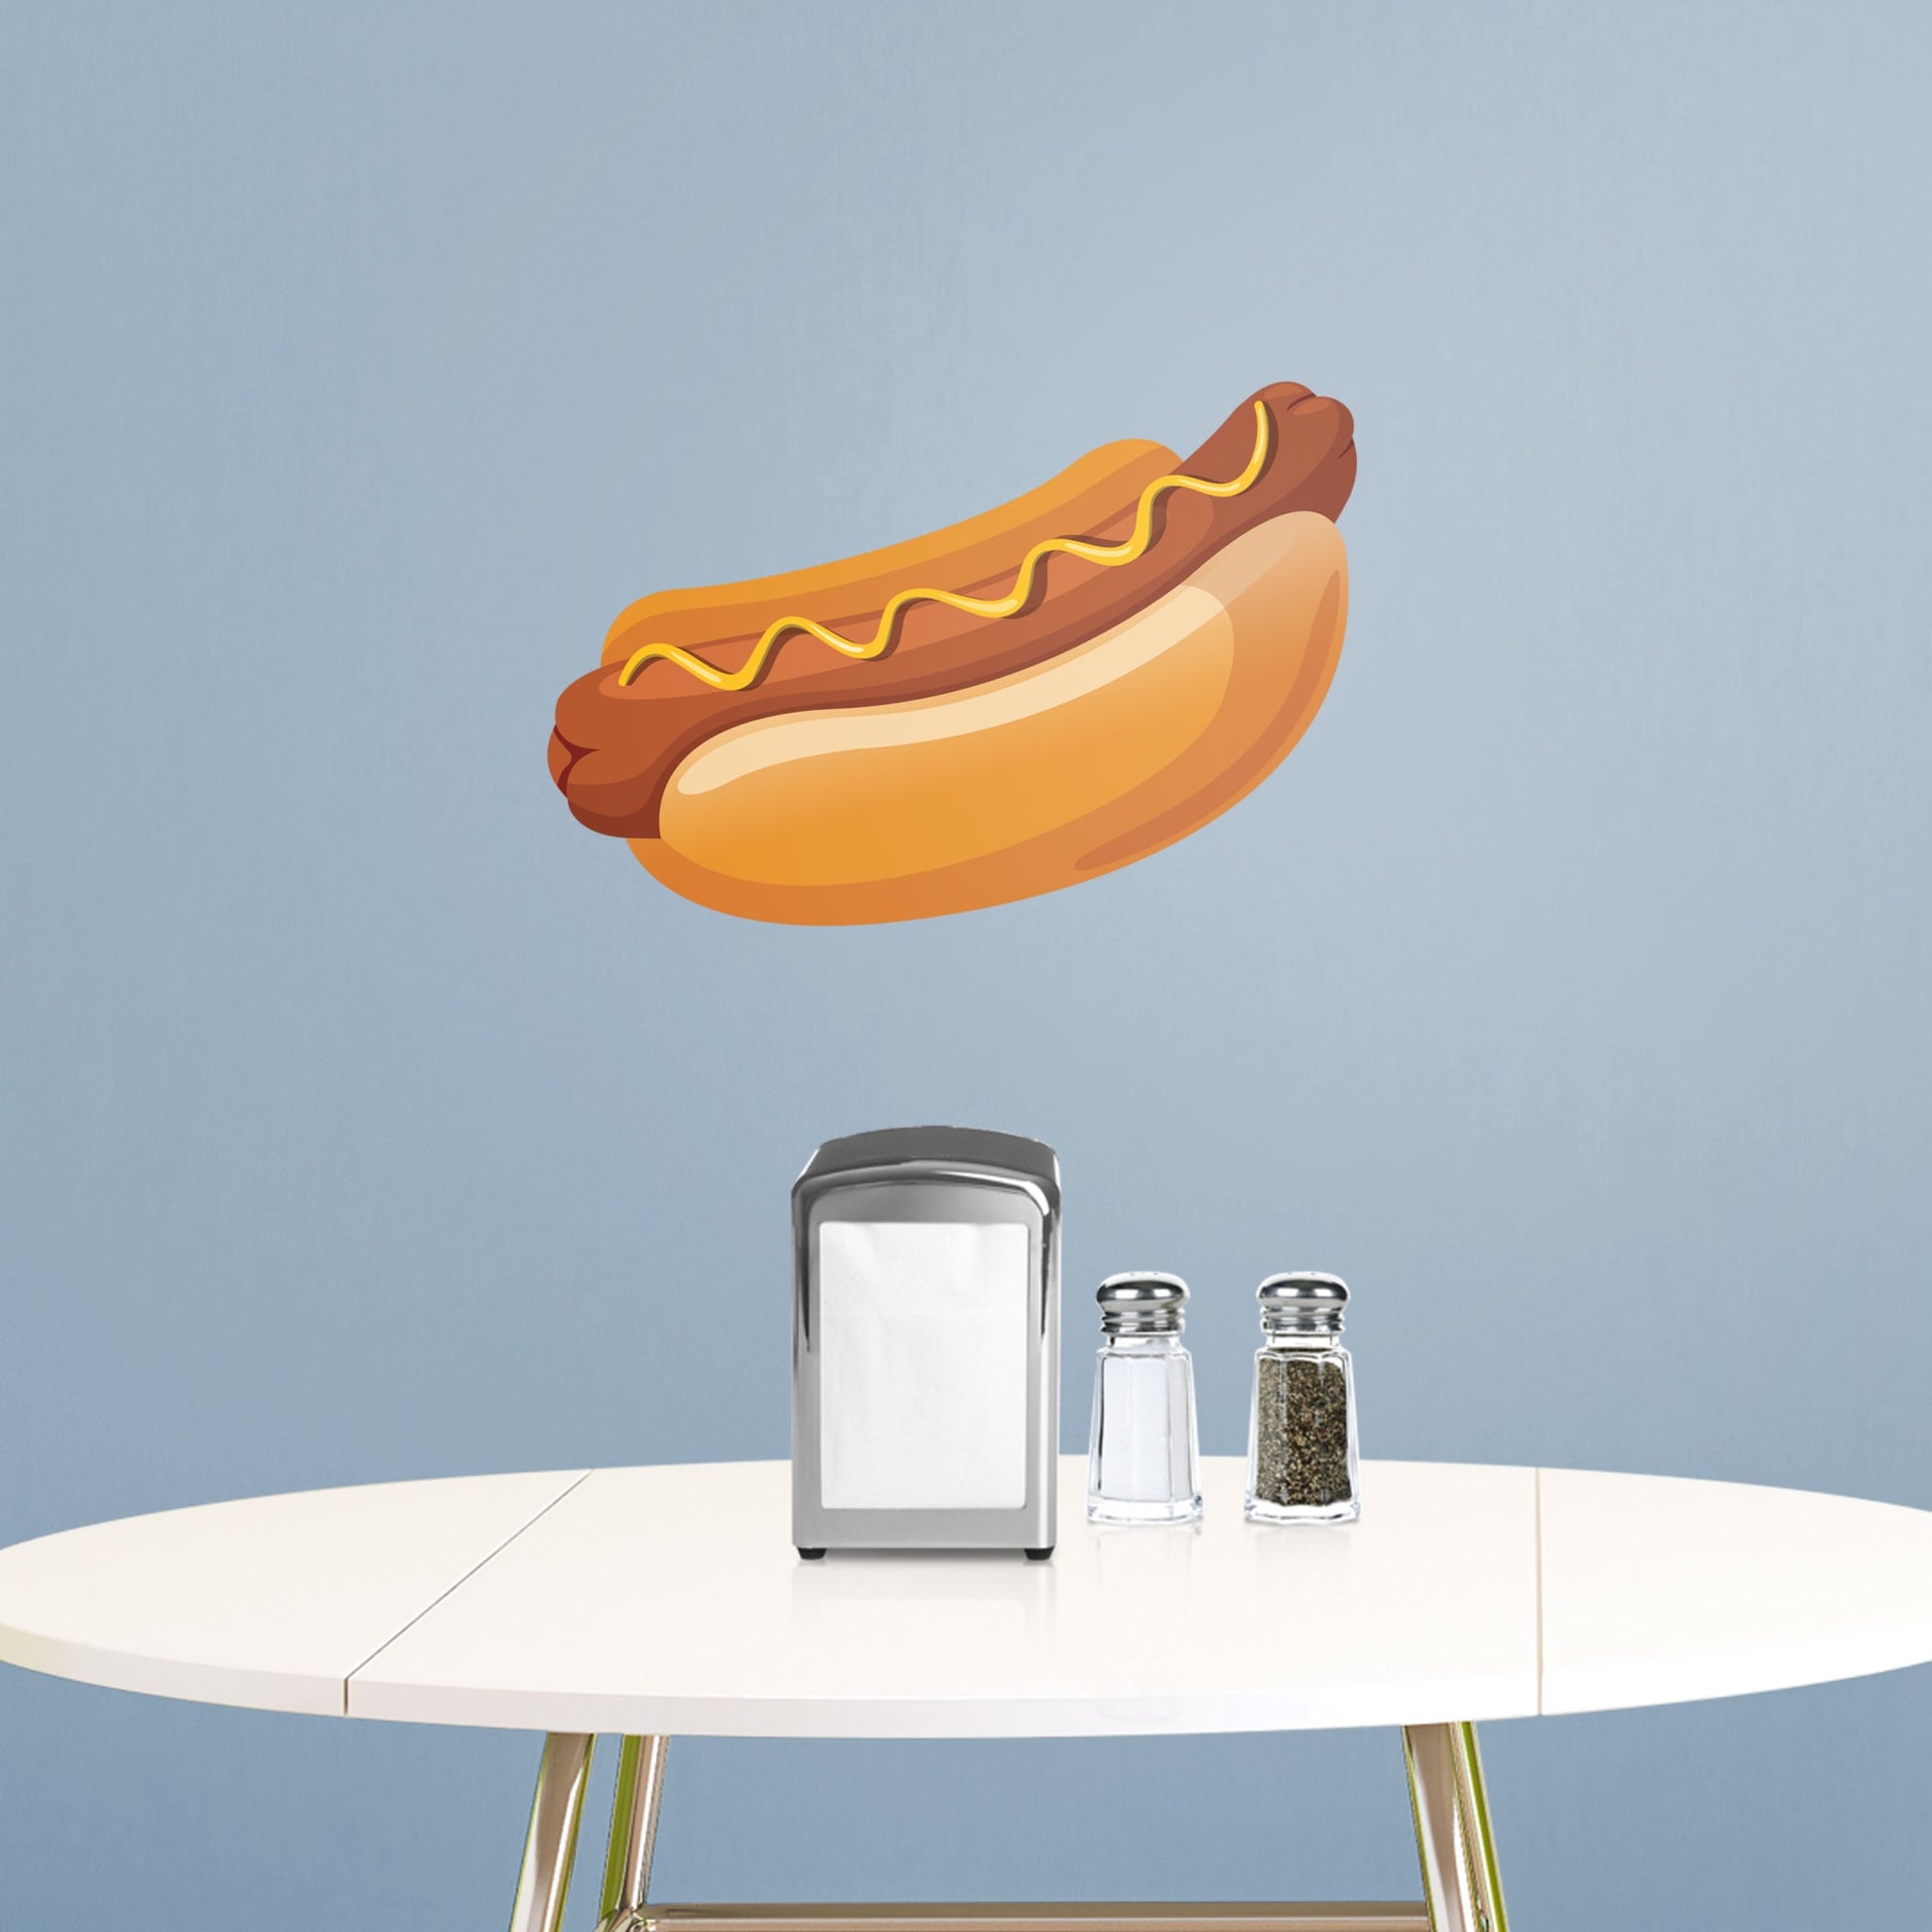 Large Hot Dog + 2 Decals (15"W x 11"H)